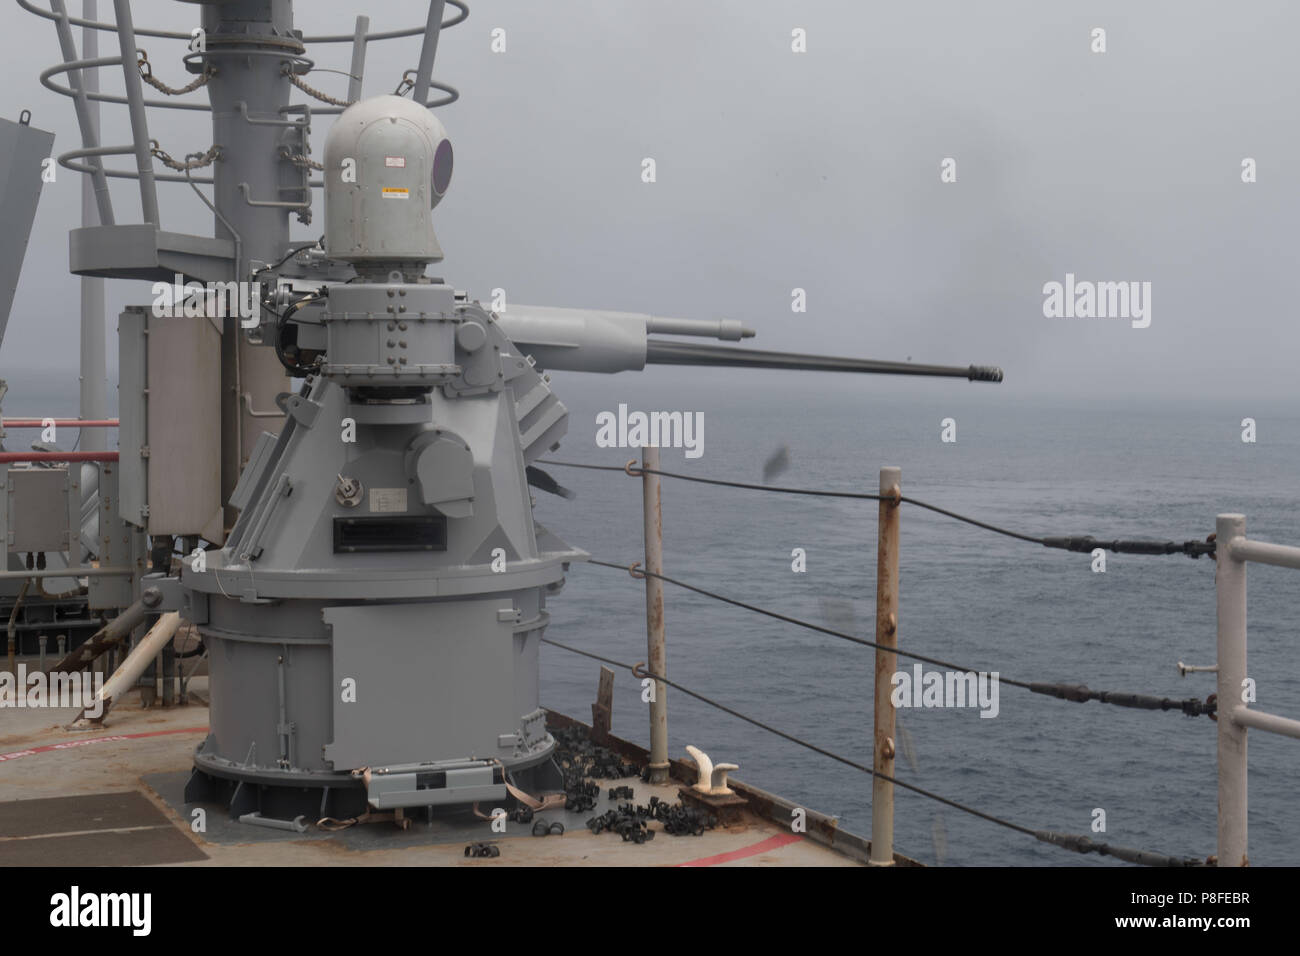 180710-N-OW019-1364 PACIFIC OCEAN (July 10, 2018) A MK38 25MM gun is fired  on the port wing wall of the amphibious dock landing ship USS Harpers Ferry  (LSD 49) during a gun exercise